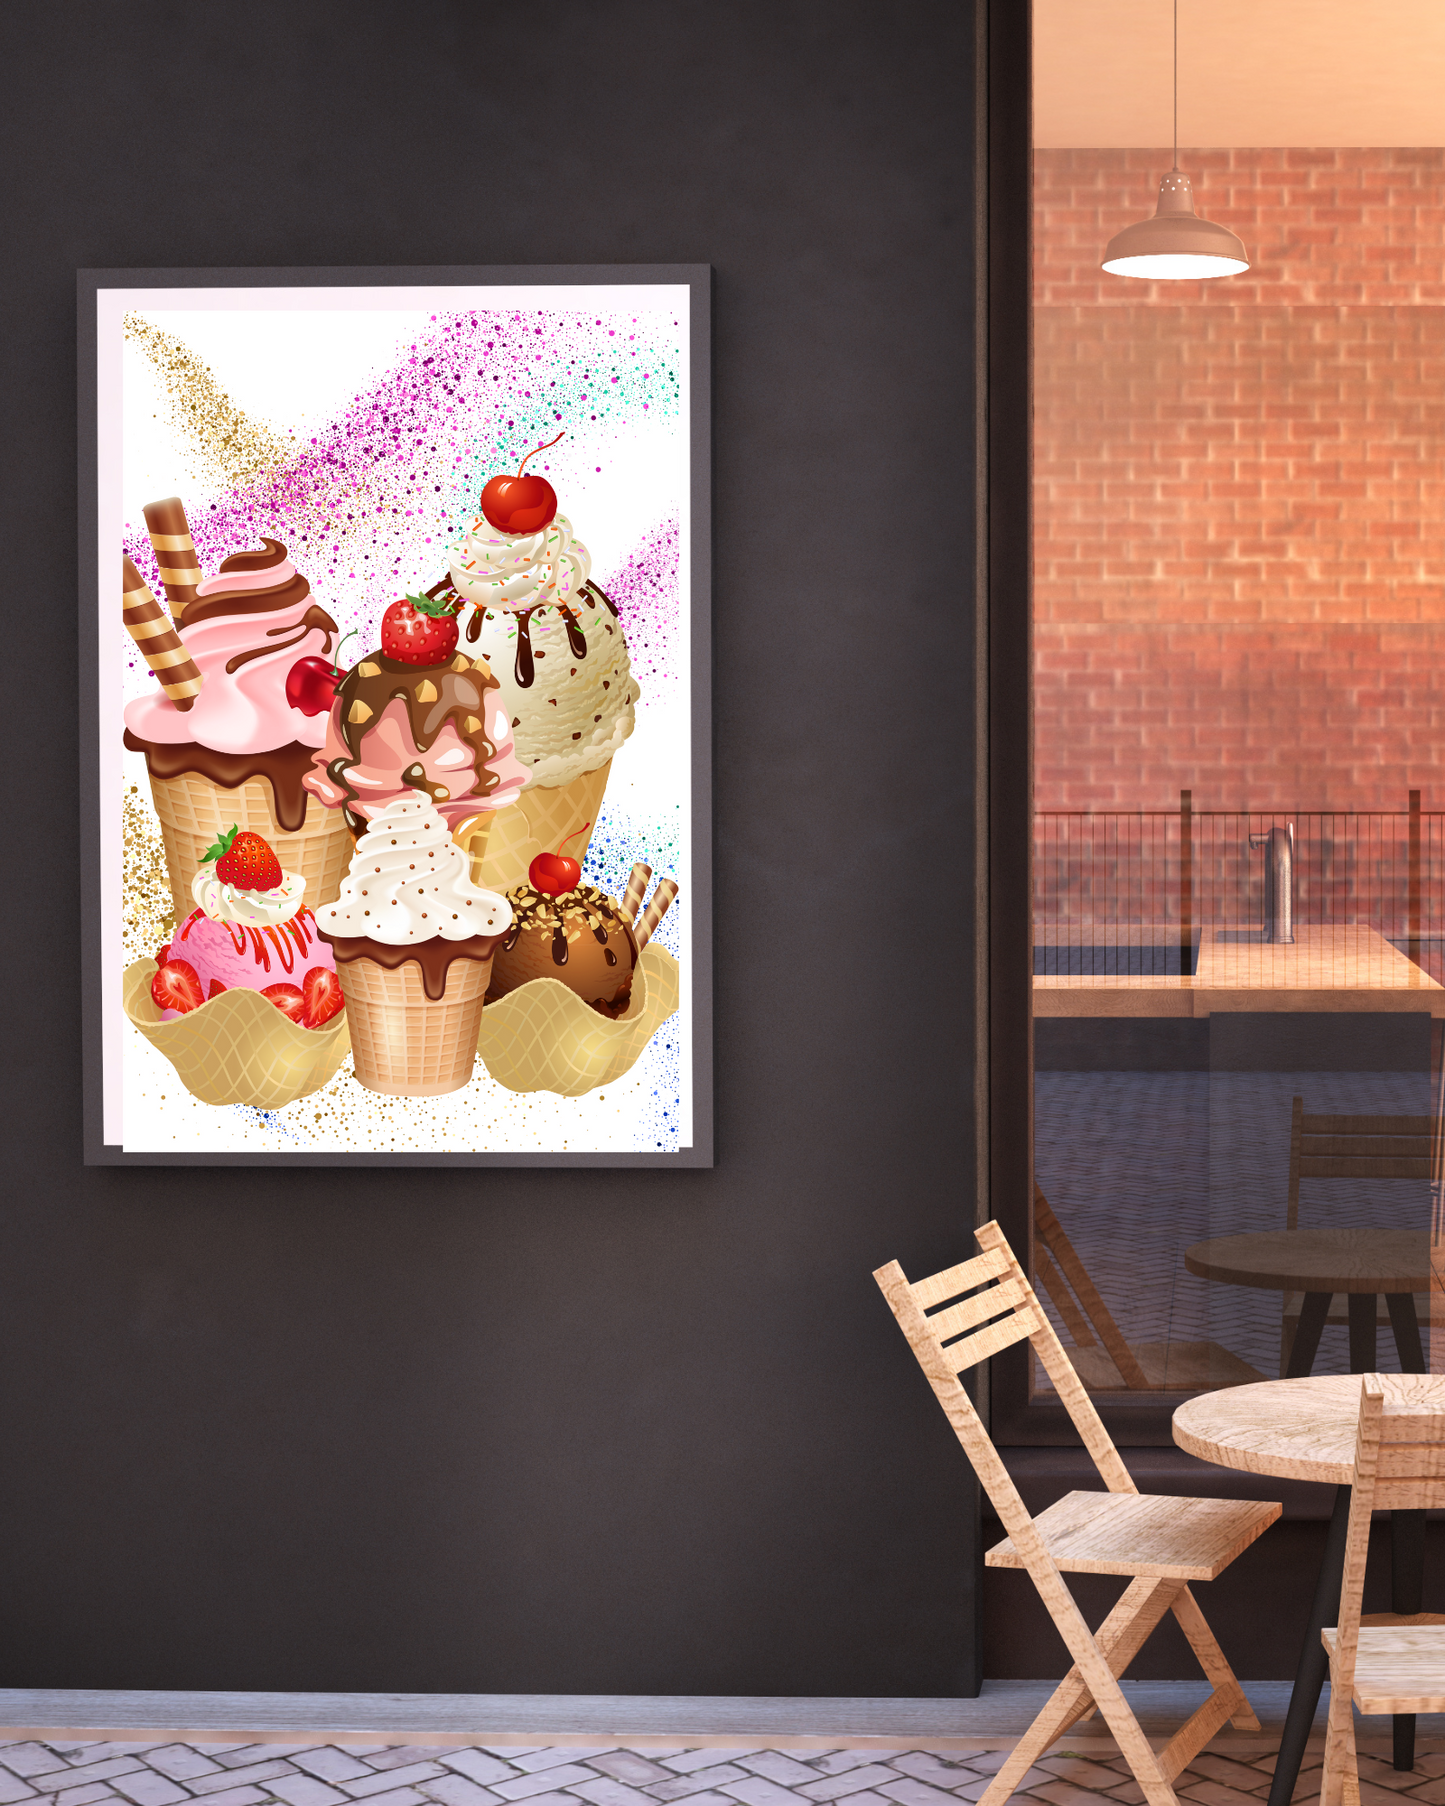 Sweet One Wall Decor, Trendy Printable Art, Trendy Art, Custom Art, Decorative Art, Wall Decor, Office Decor, Room Decor, Printable Wall Art, Printable Art, Instant Download, Hanging Wall Art, High Quality Art, High Quality Printable